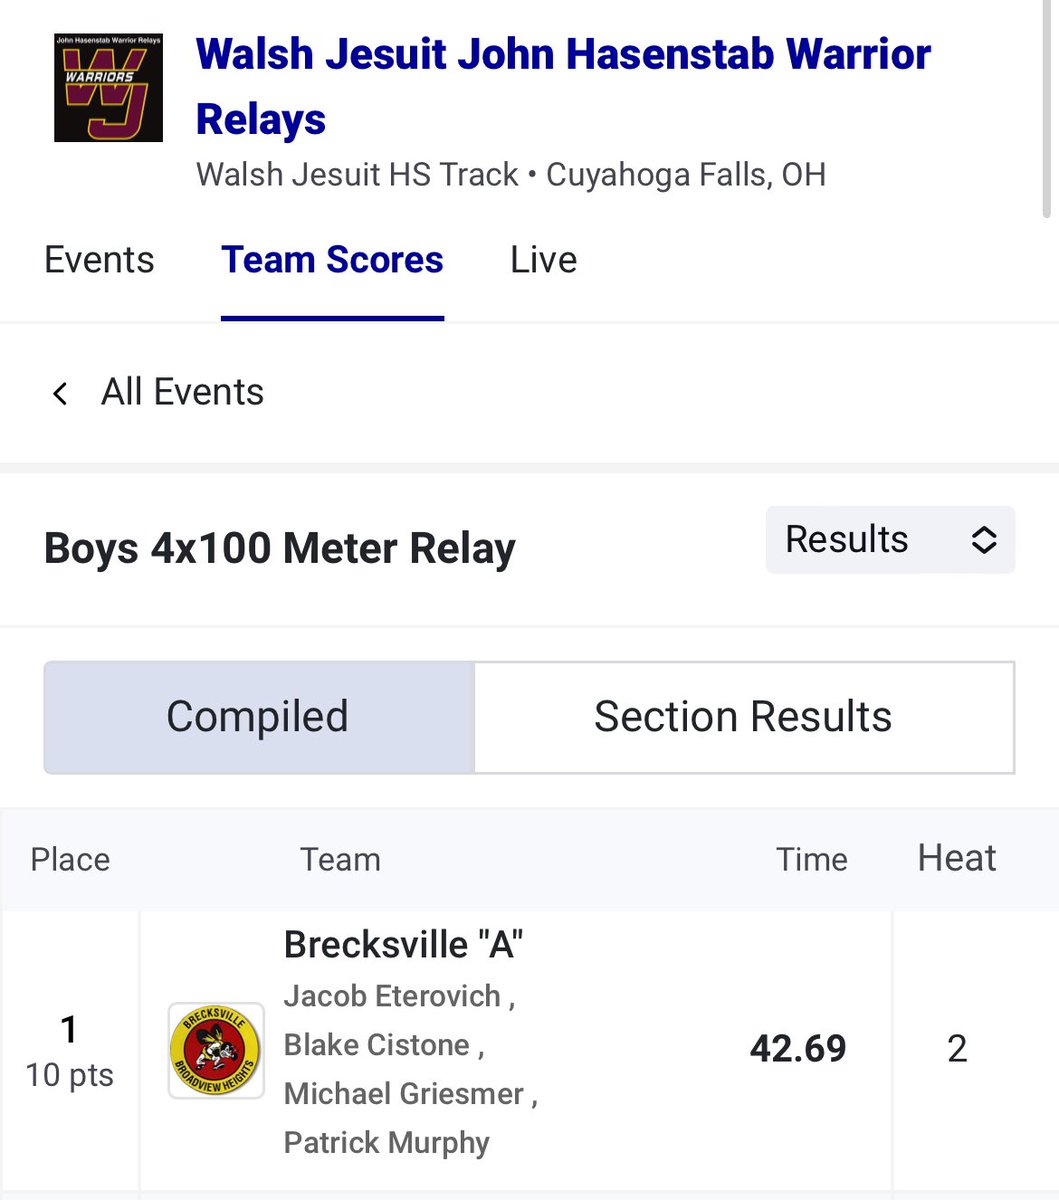 NEW BOYS 4x100m SCHOOL RECORD with a time of 42.69‼️‼️ Huge accomplishment today at the Walsh Relays for Jacob Eterovich, Blake Cistone, Michael Griesmer, & Patrick Murphy. #beeproud 🐝🐝